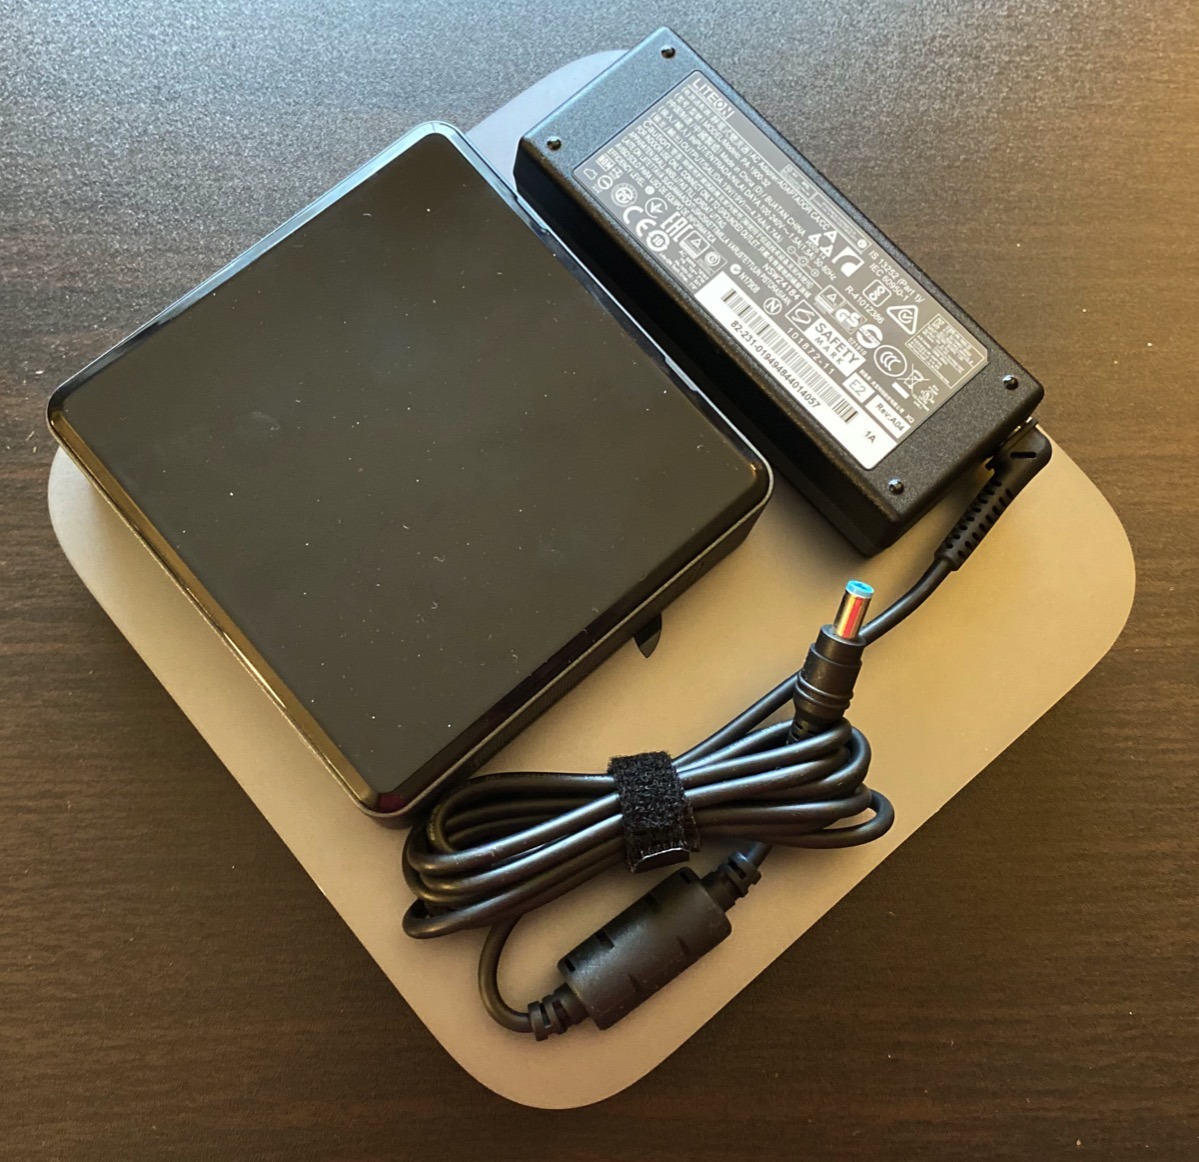 Adding the power supply to the footprint of the Intel NUC brings it much closer to the Mac mini